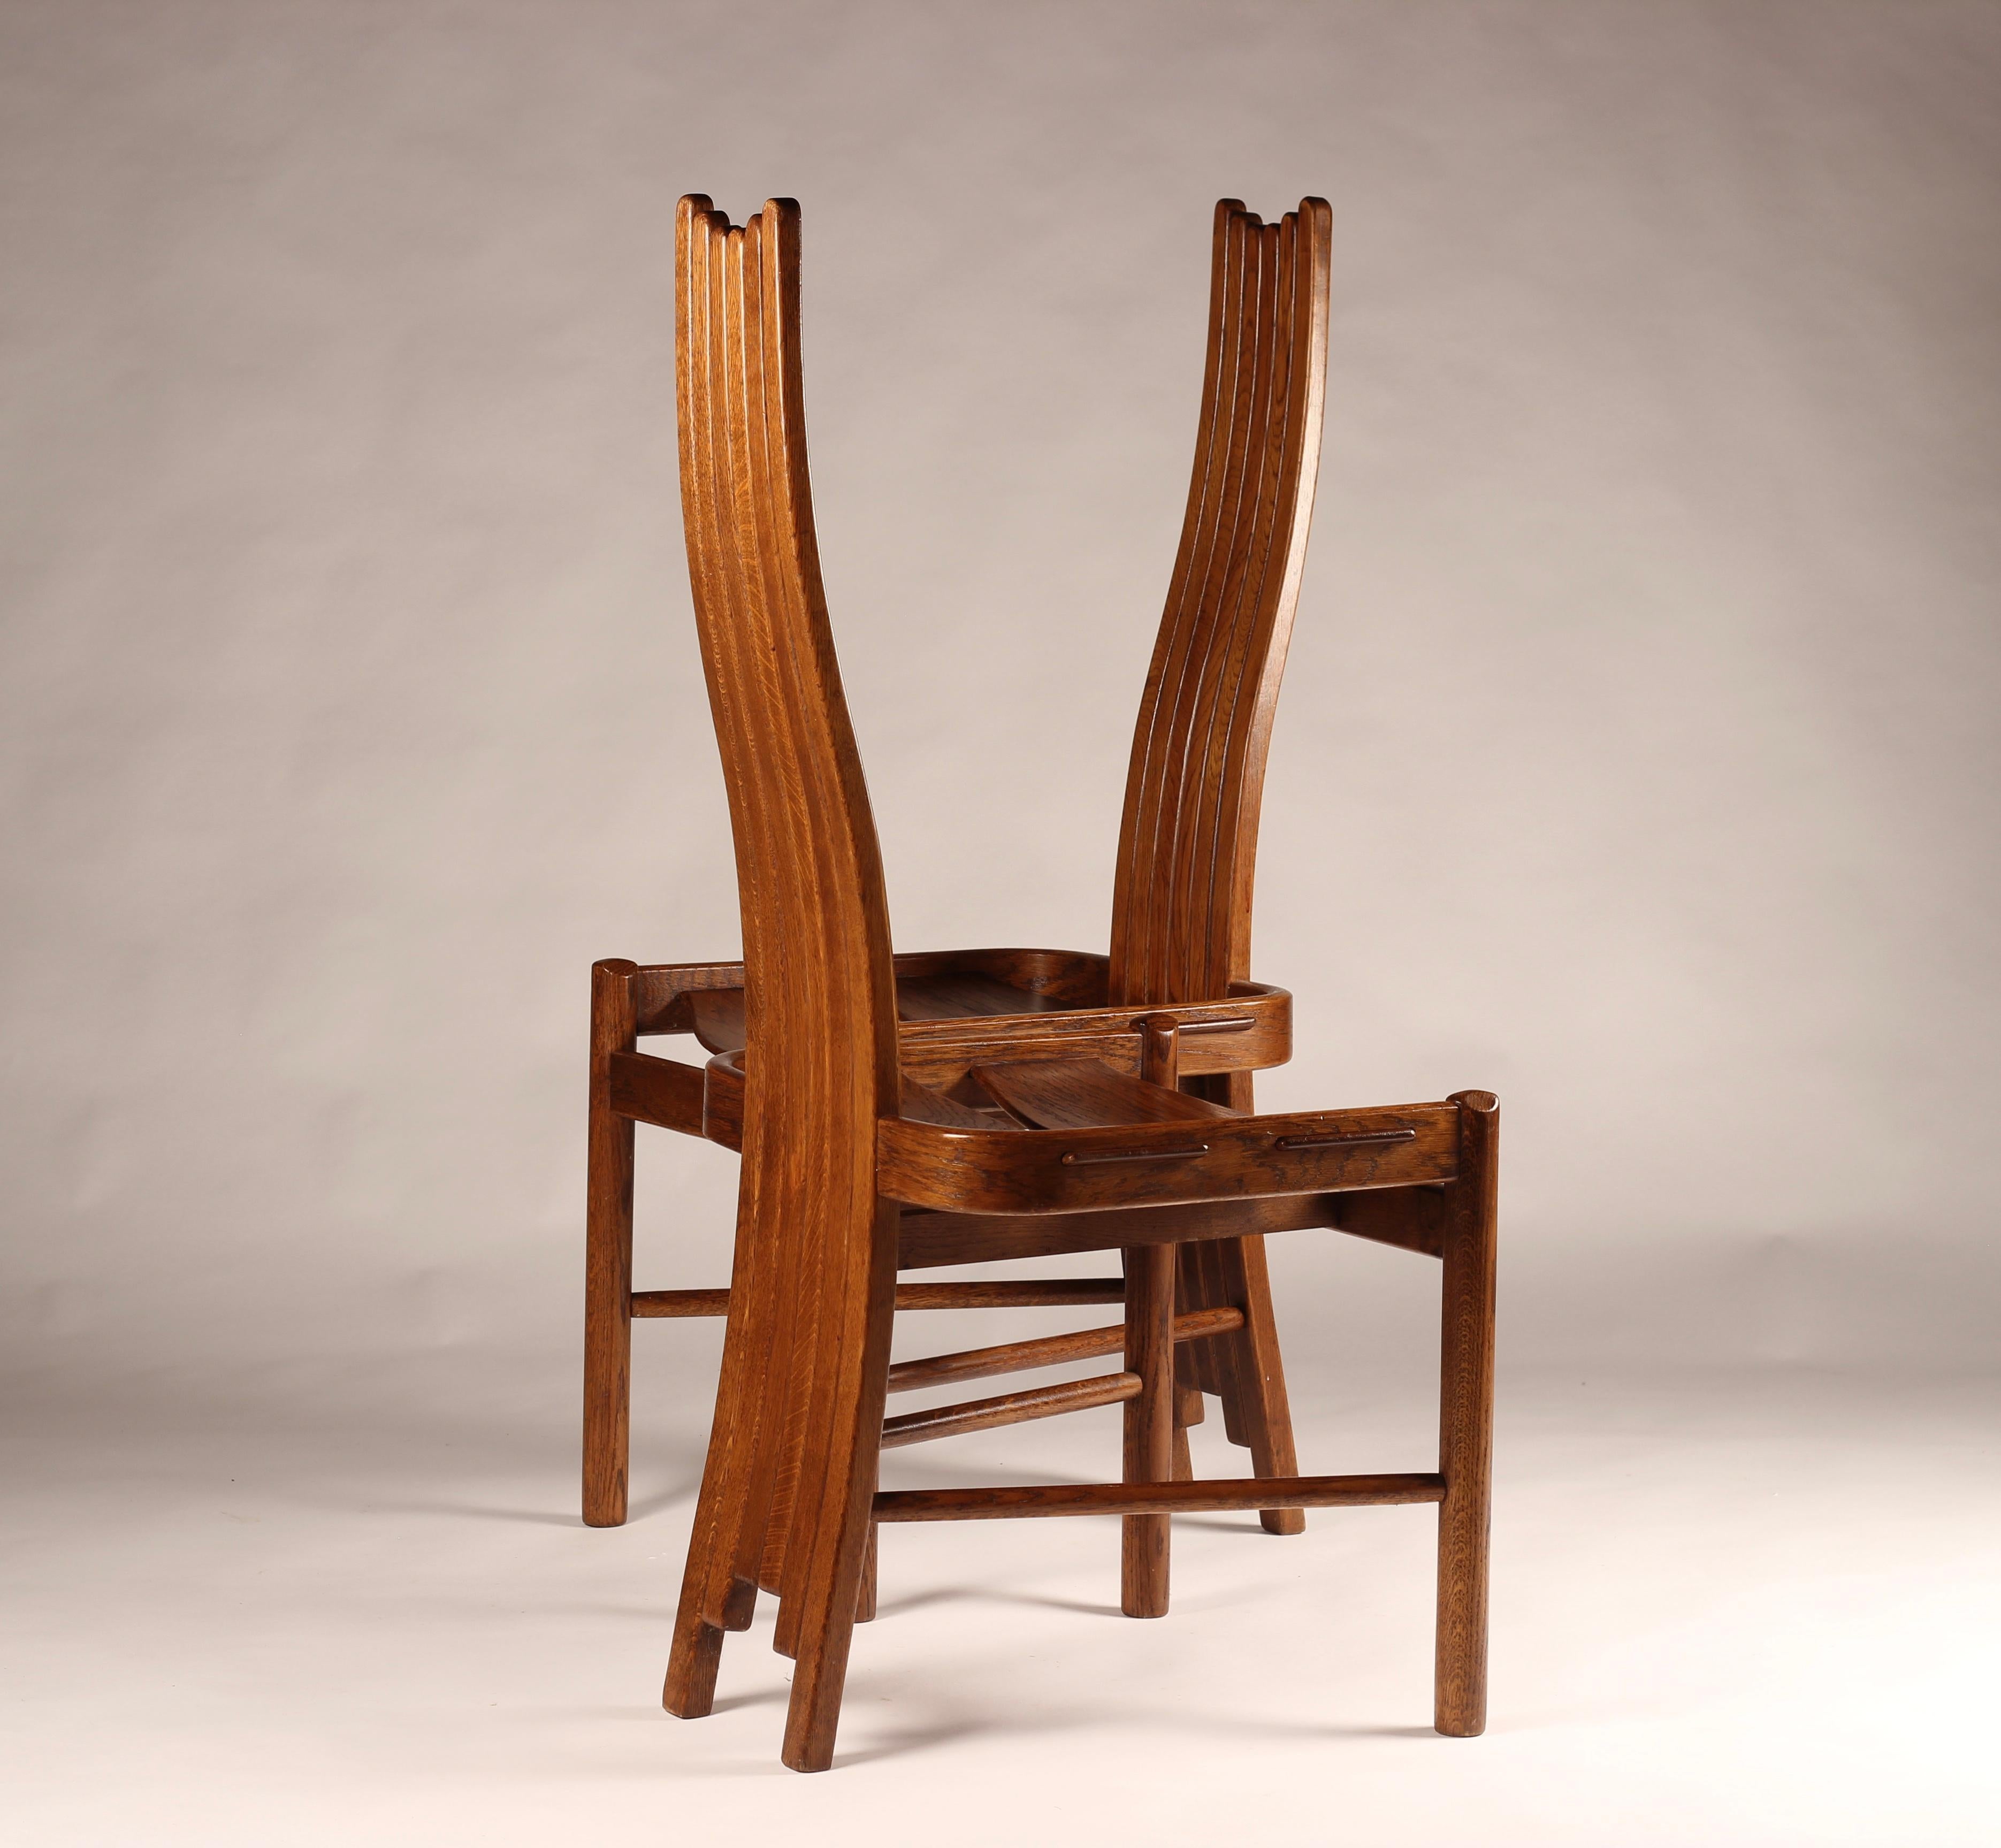 Oak Steam Bent Dining Chairs in the Arts and Crafts/ Art Nouveau Style, 1900’s For Sale 4